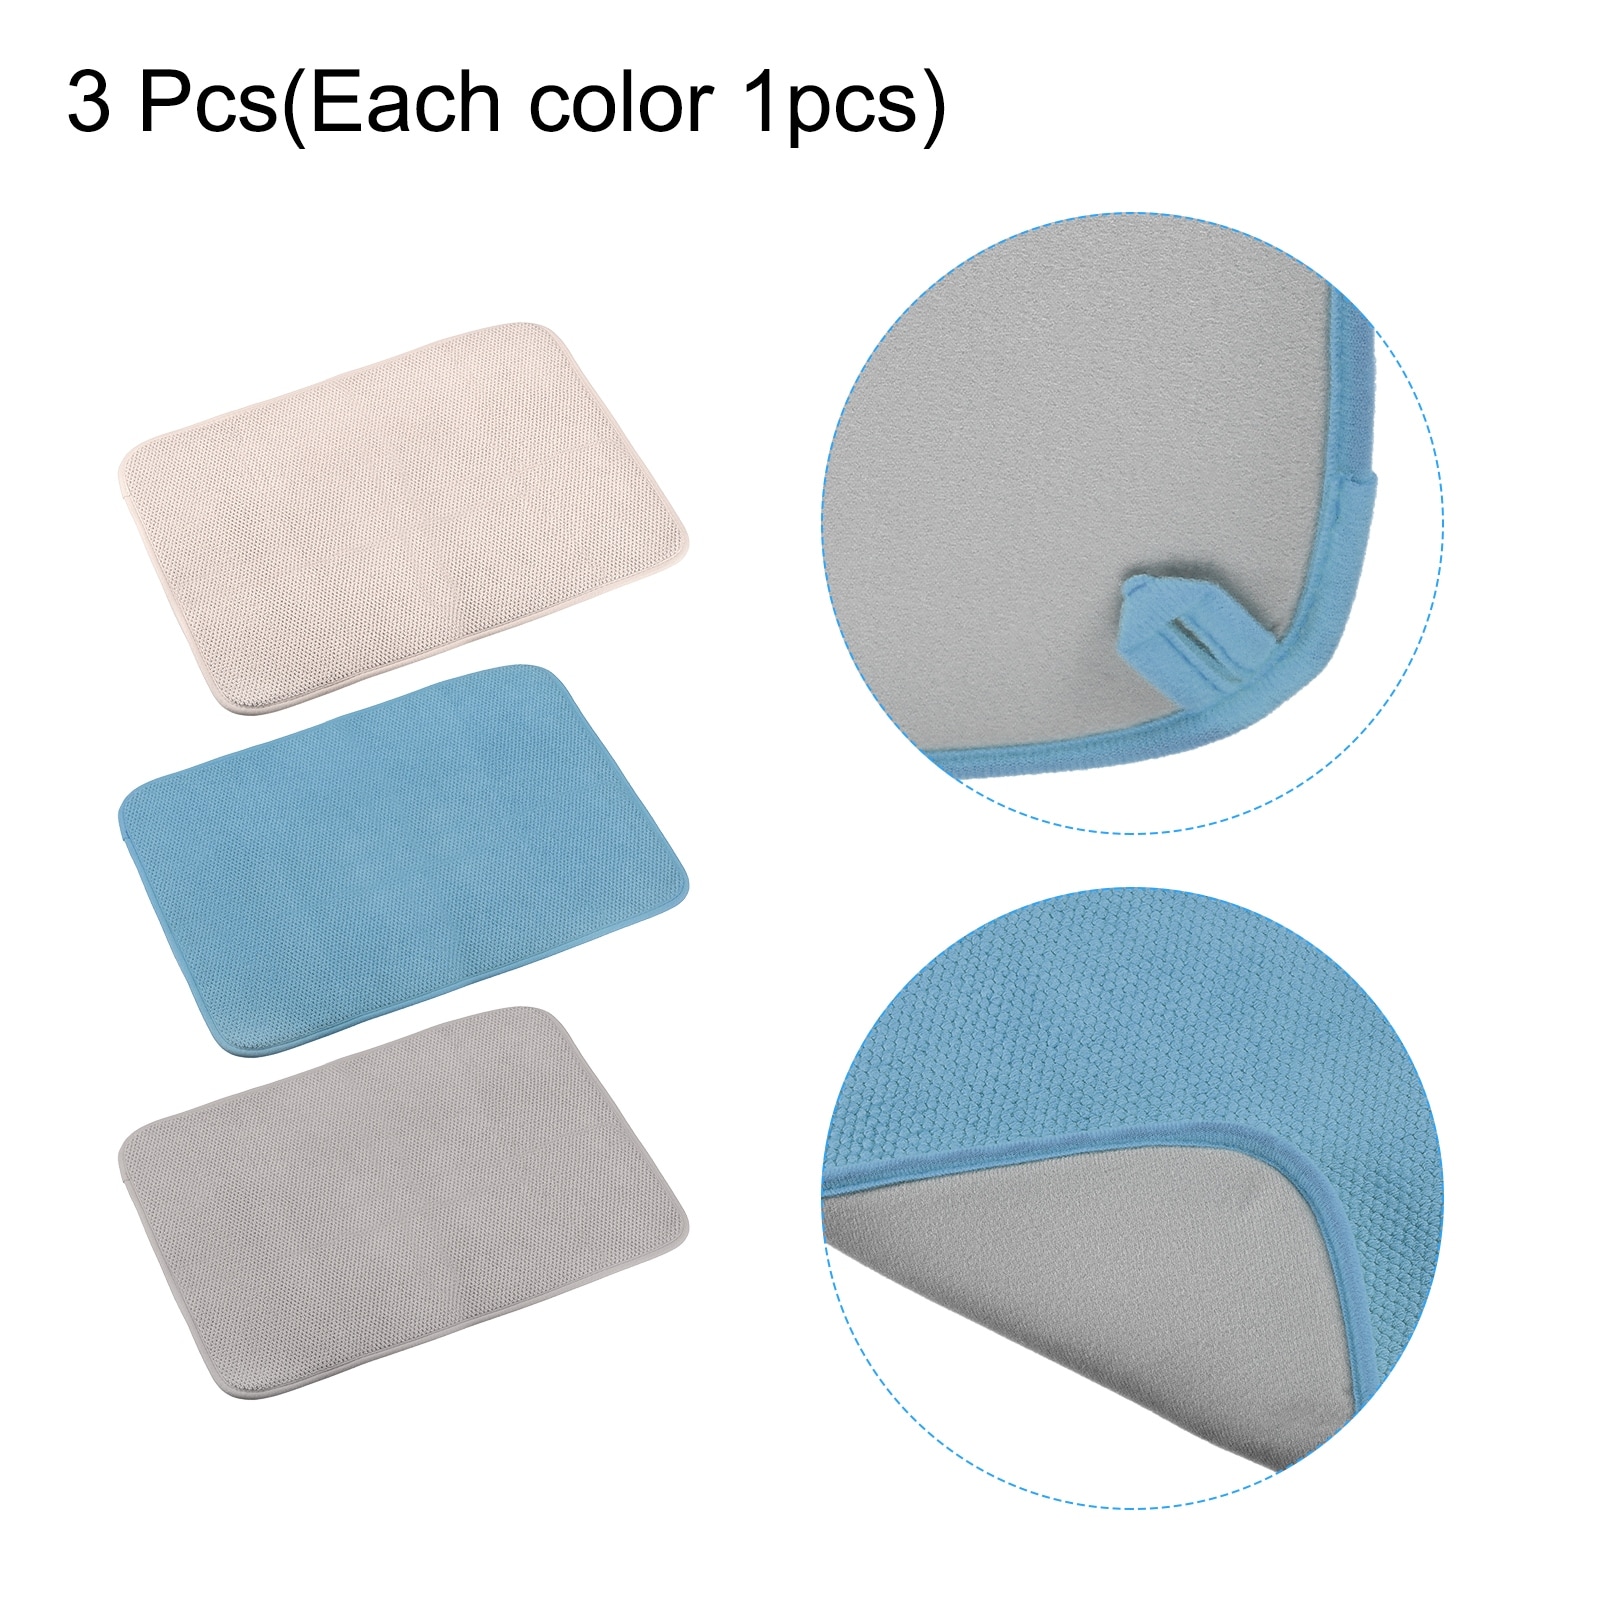 https://ak1.ostkcdn.com/images/products/is/images/direct/f62f639efe02accded58ab3a3524a6802eef864e/3pcs-Microfiber-Absorbent-Dish-Drying-Mat-for-Countertop-Blue-Grey-Beige.jpg